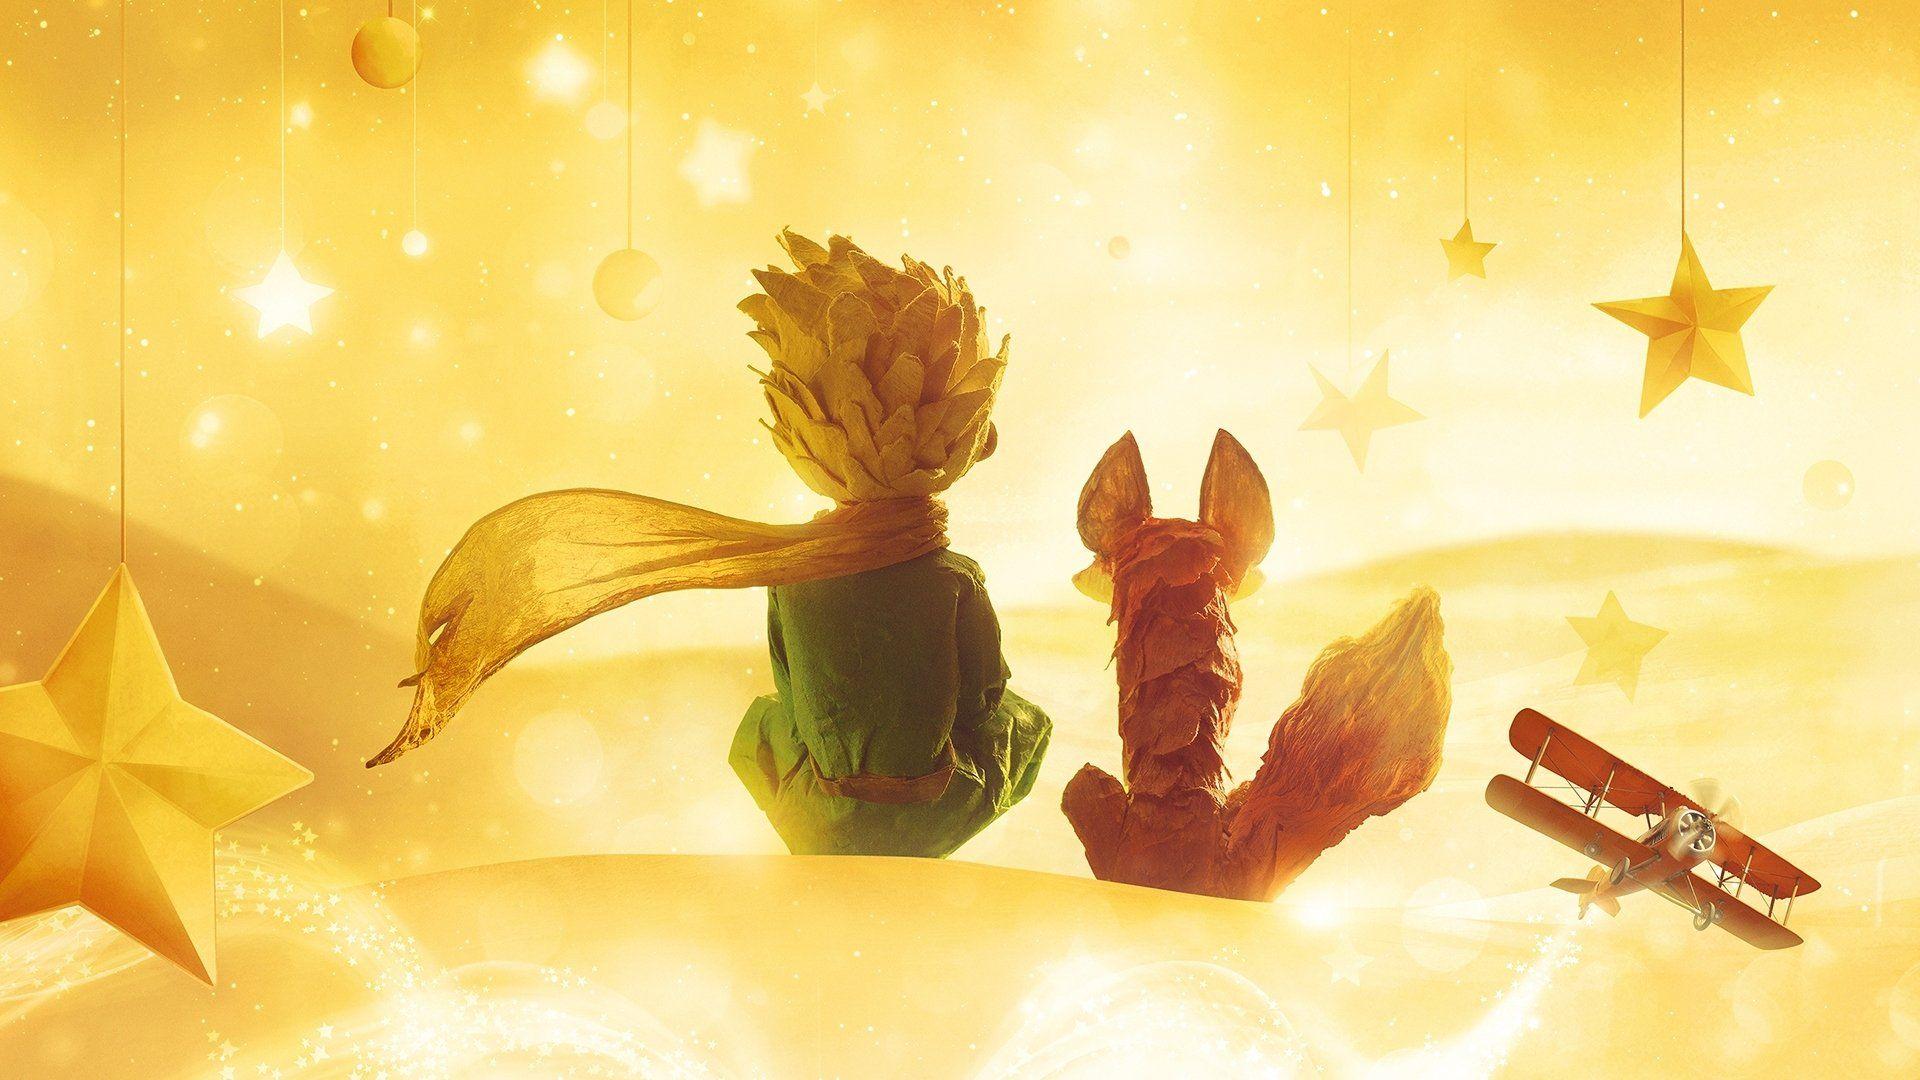 Details 88+ the little prince wallpaper - in.coedo.com.vn